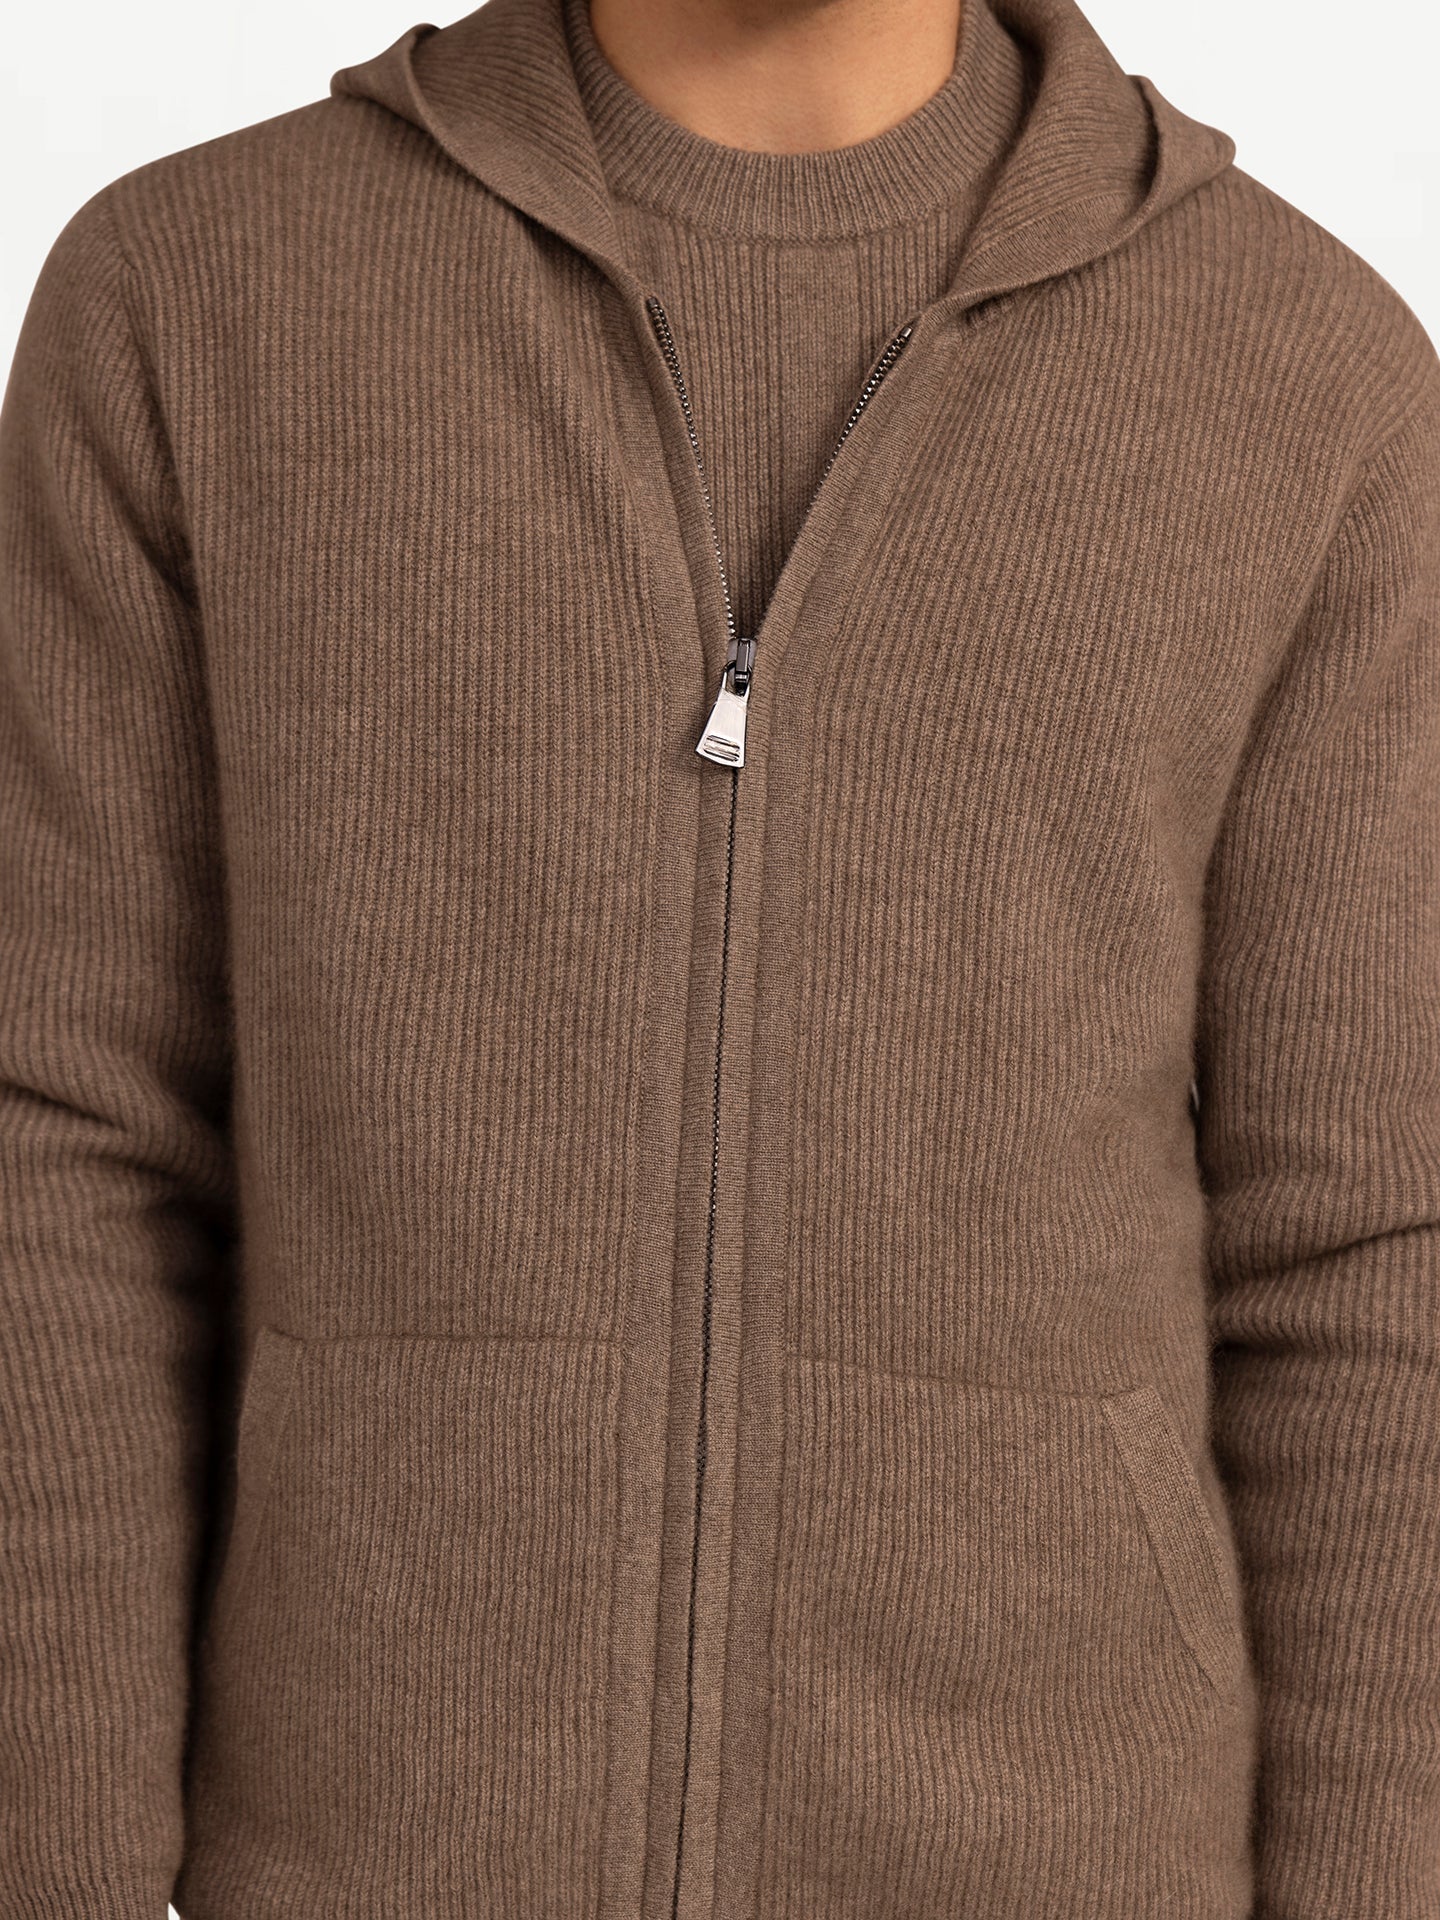 Men's Cashmere Zip Hoodie with Pockets Taupe - Gobi Cashmere